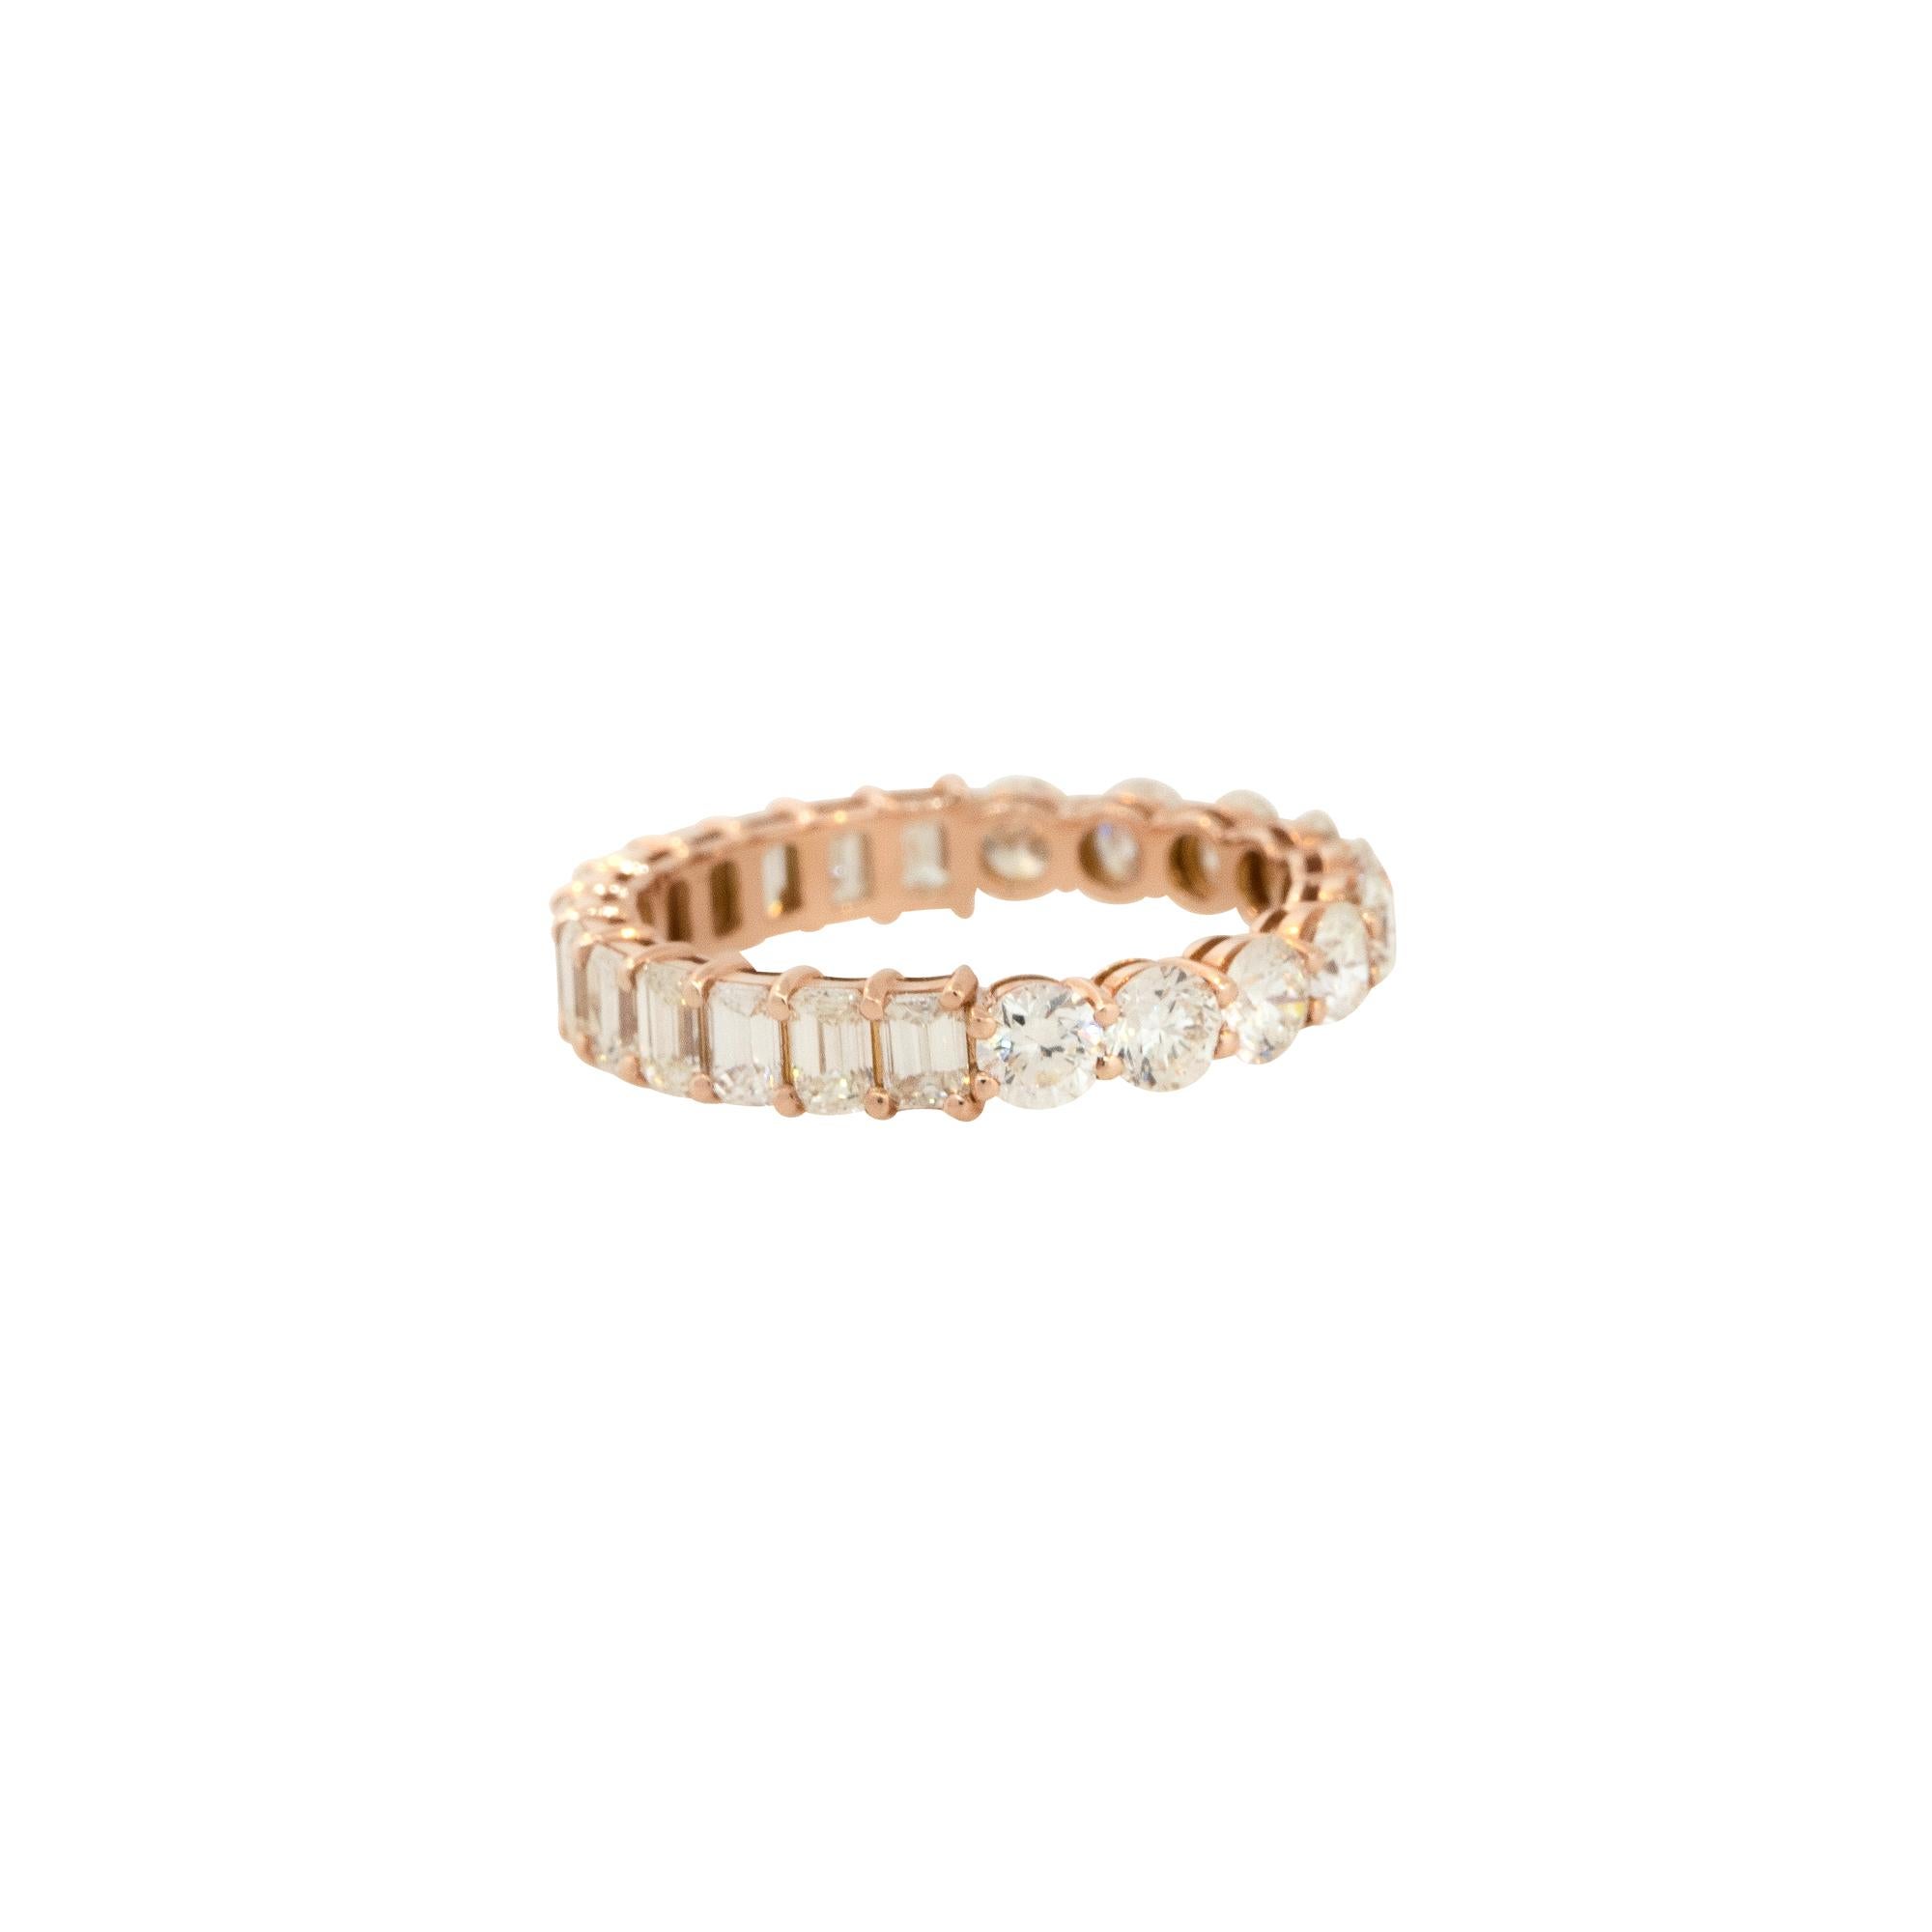 14k Rose Gold 2.71ctw Round and Emerald Cut Diamond Eternity Band

Material: 14k Rose Gold
Diamond Details: Approximately 2.71ctw of Round and Emerald Cut Diamonds. There are 23 Diamonds total. Diamonds are approximately G/H in Color and VS/SI in